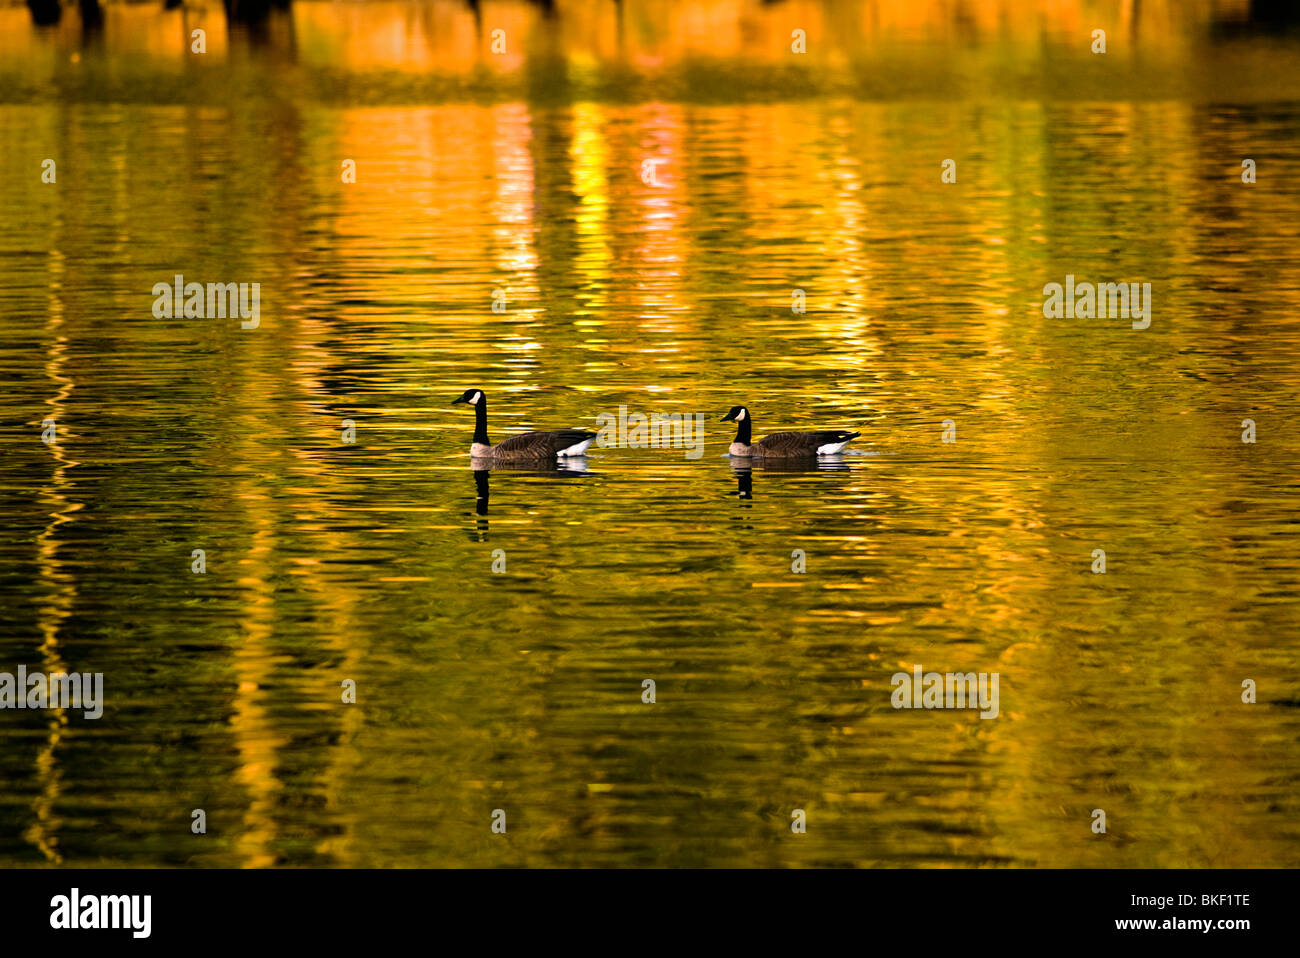 Page 2 - Golden Goose High Resolution Stock Photography and Images - Alamy